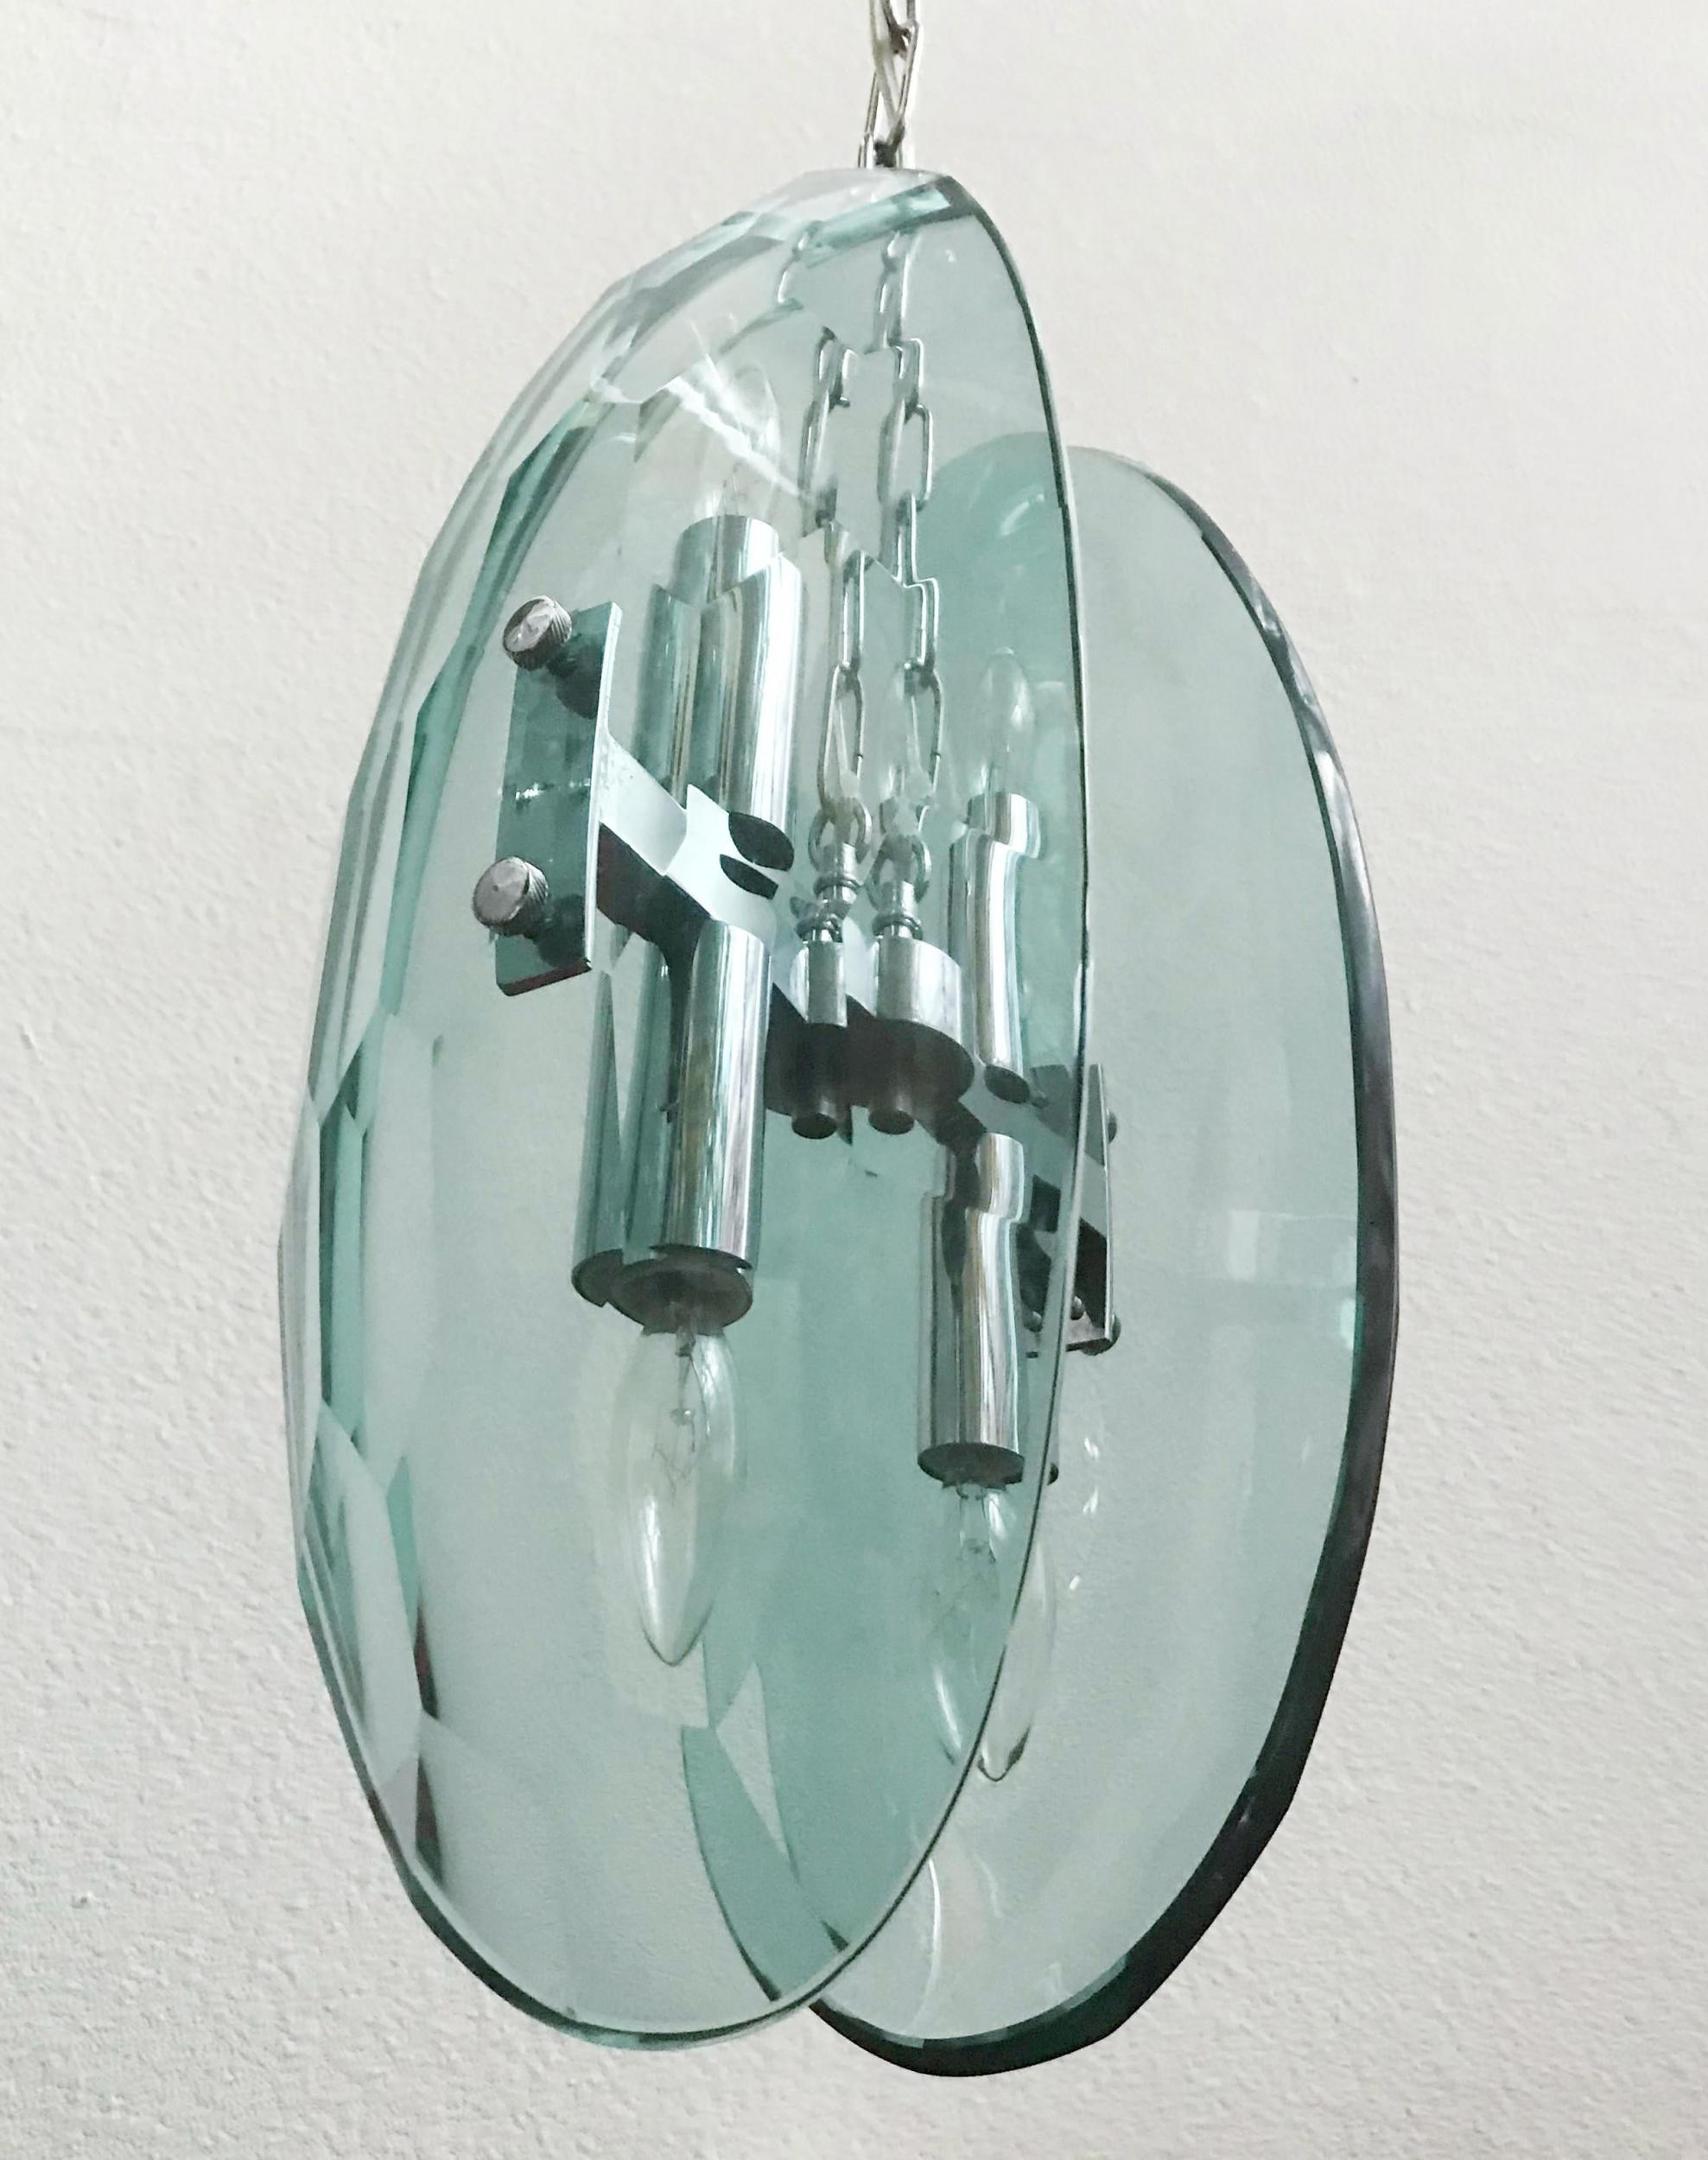 Vintage pendant with two large curved faceted beveled glasses, mounted on chrome frame by Max Ingrand for Fontana Arte/ Made in Italy, circa 1960s